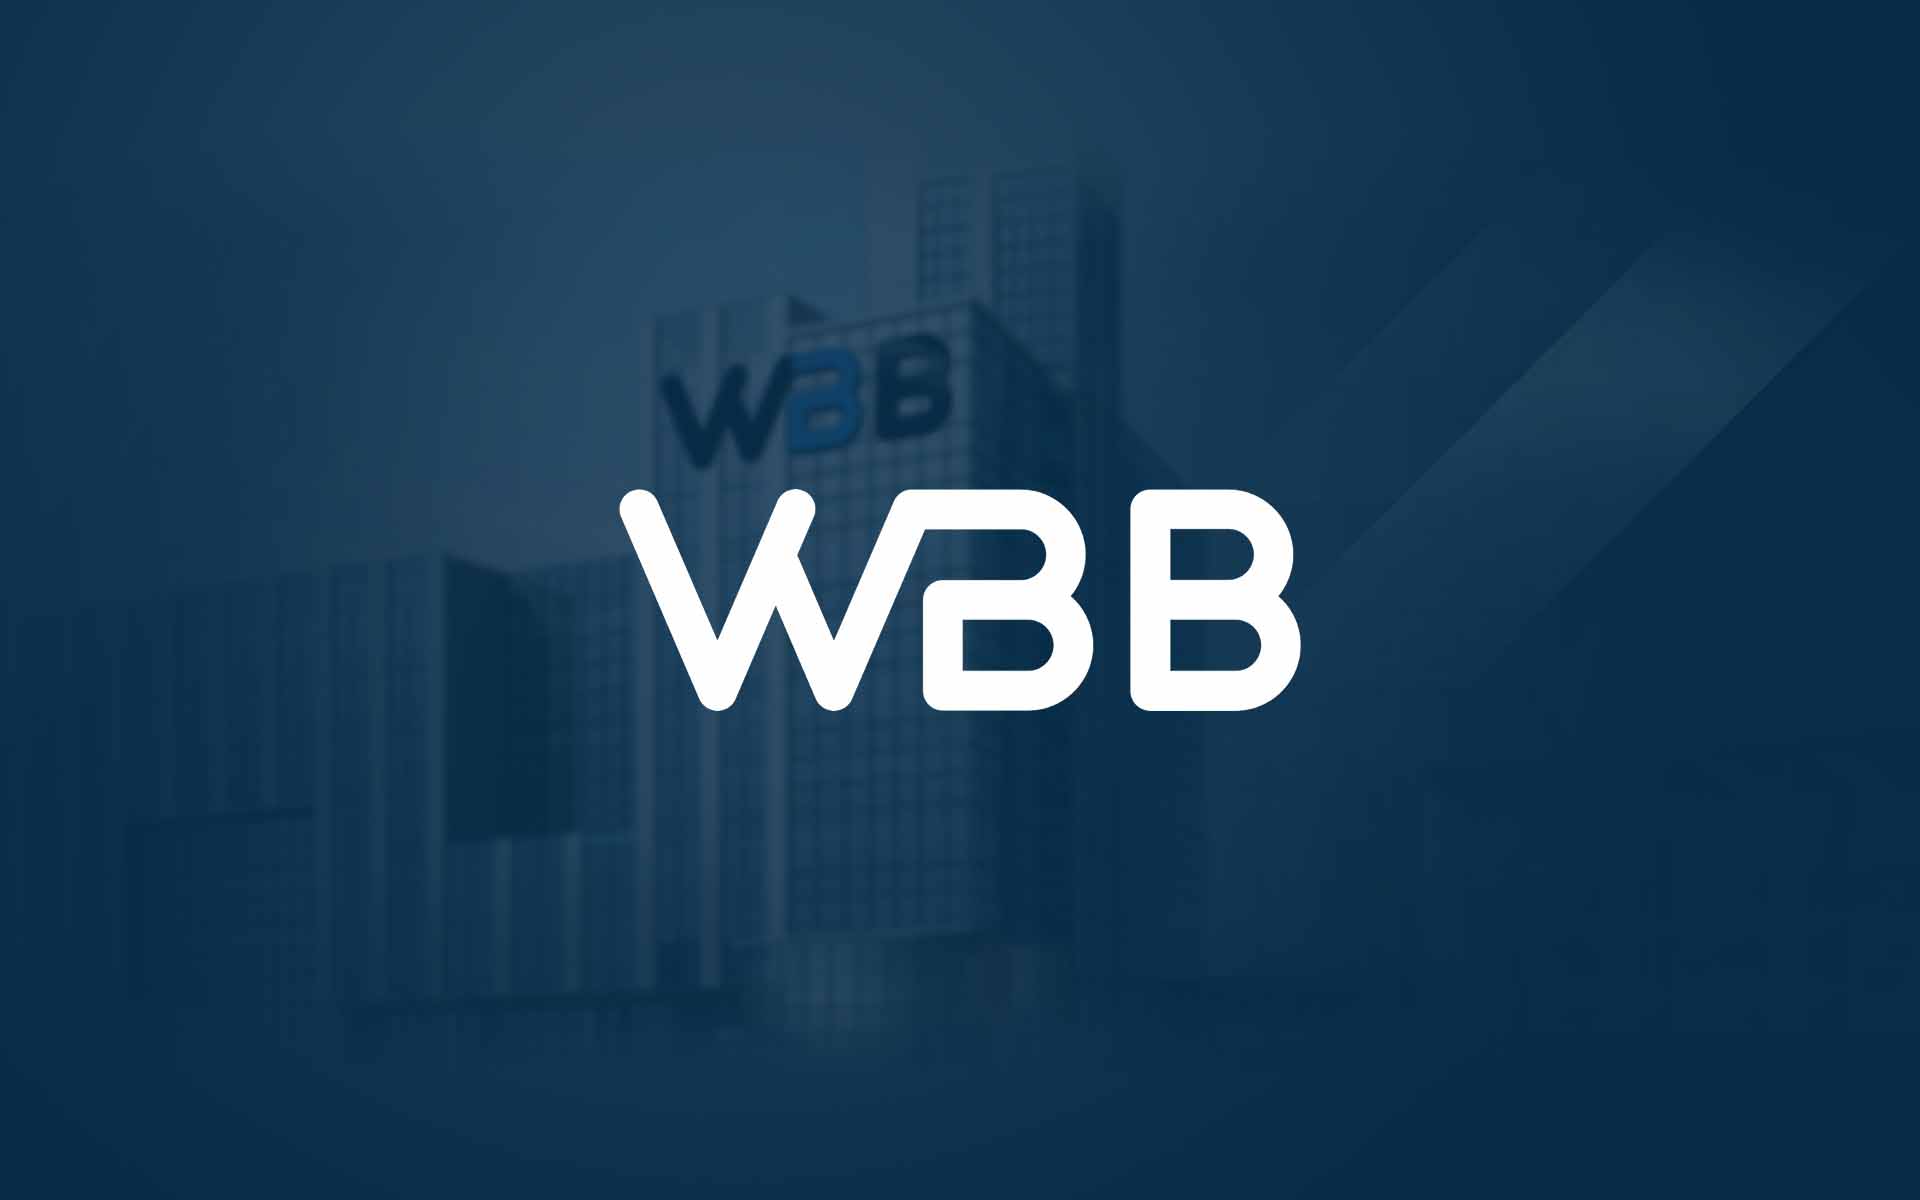 Several days are left before the first PRE- ICO is to be held. Now we can watch and analyze the particular steps WBB-group team has already undertaken.